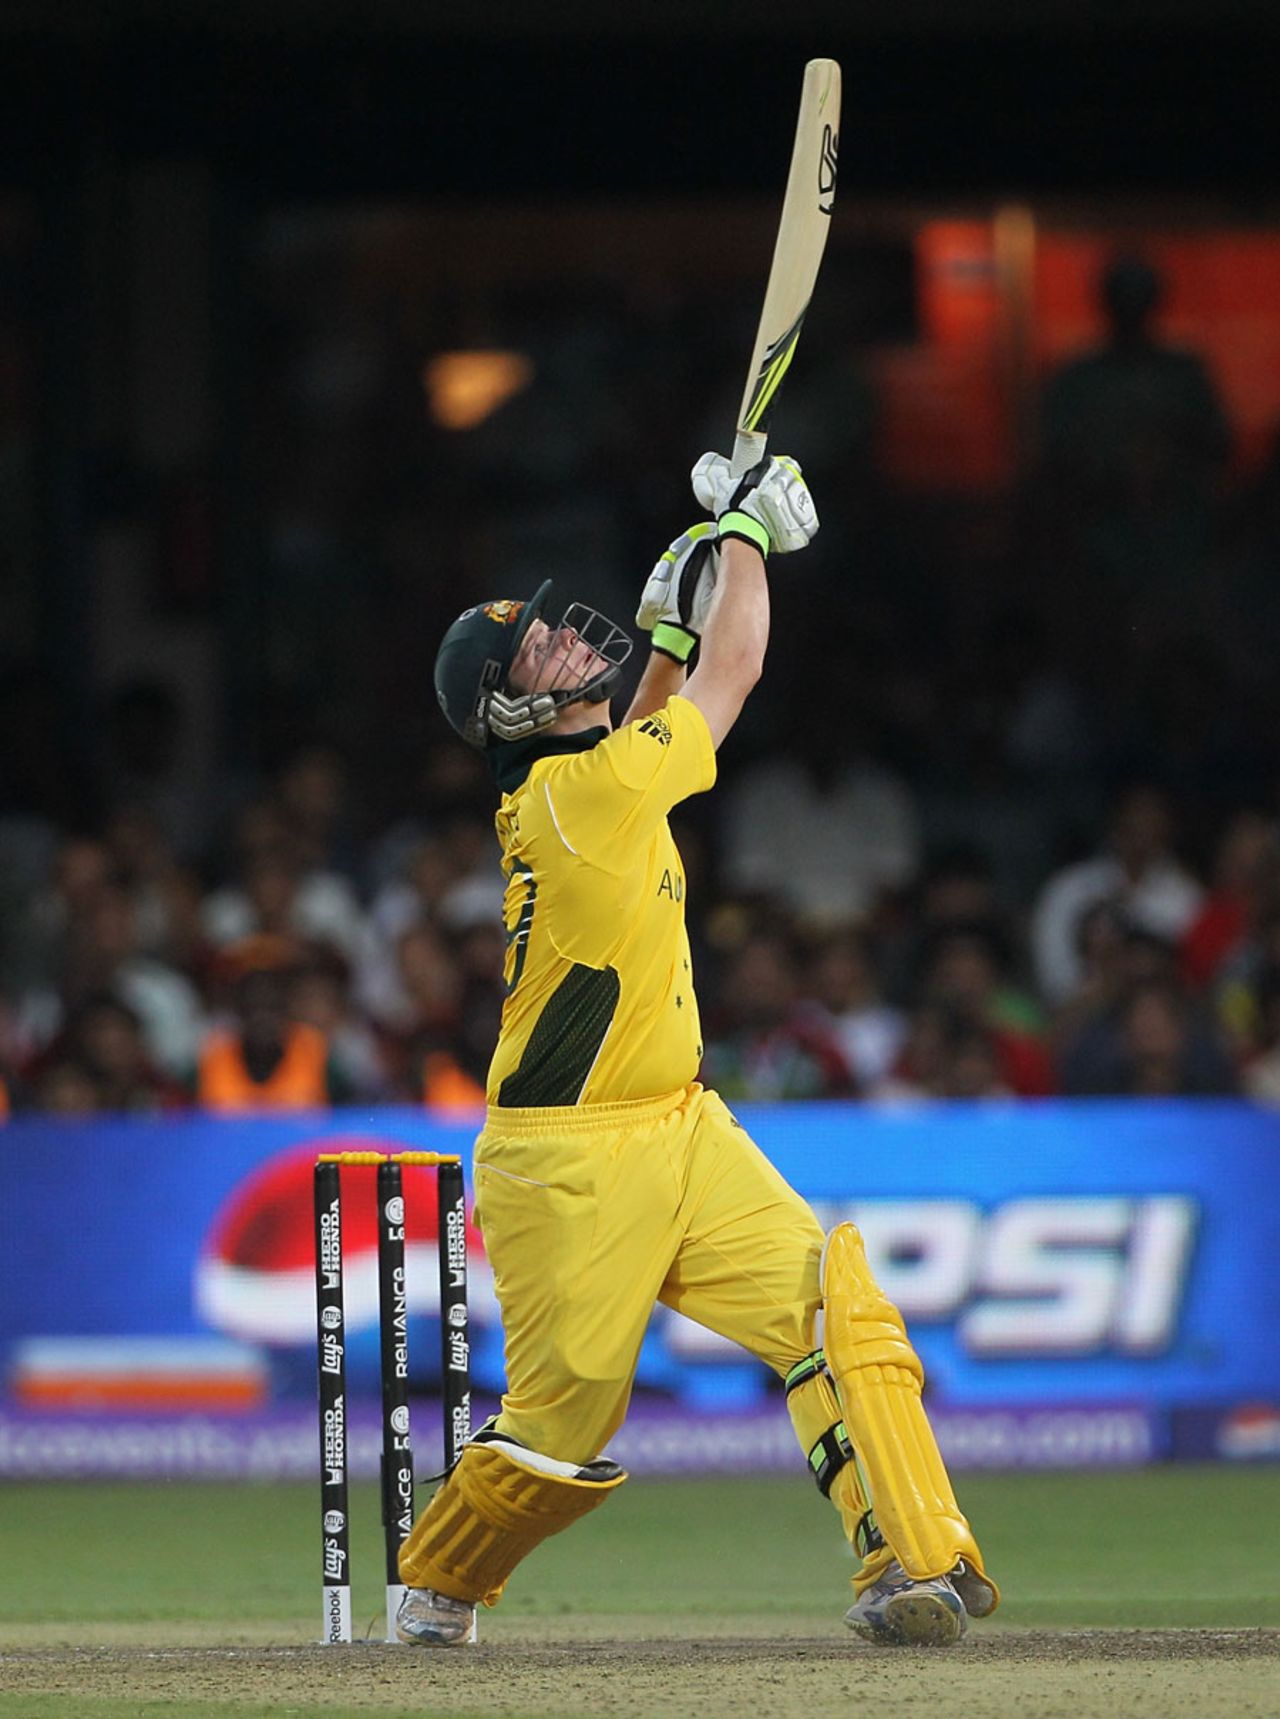 Steven Smith launches one into the atmosphere, Australia v Kenya, World Cup 2011, Group A, Bangalore, March 13, 2011